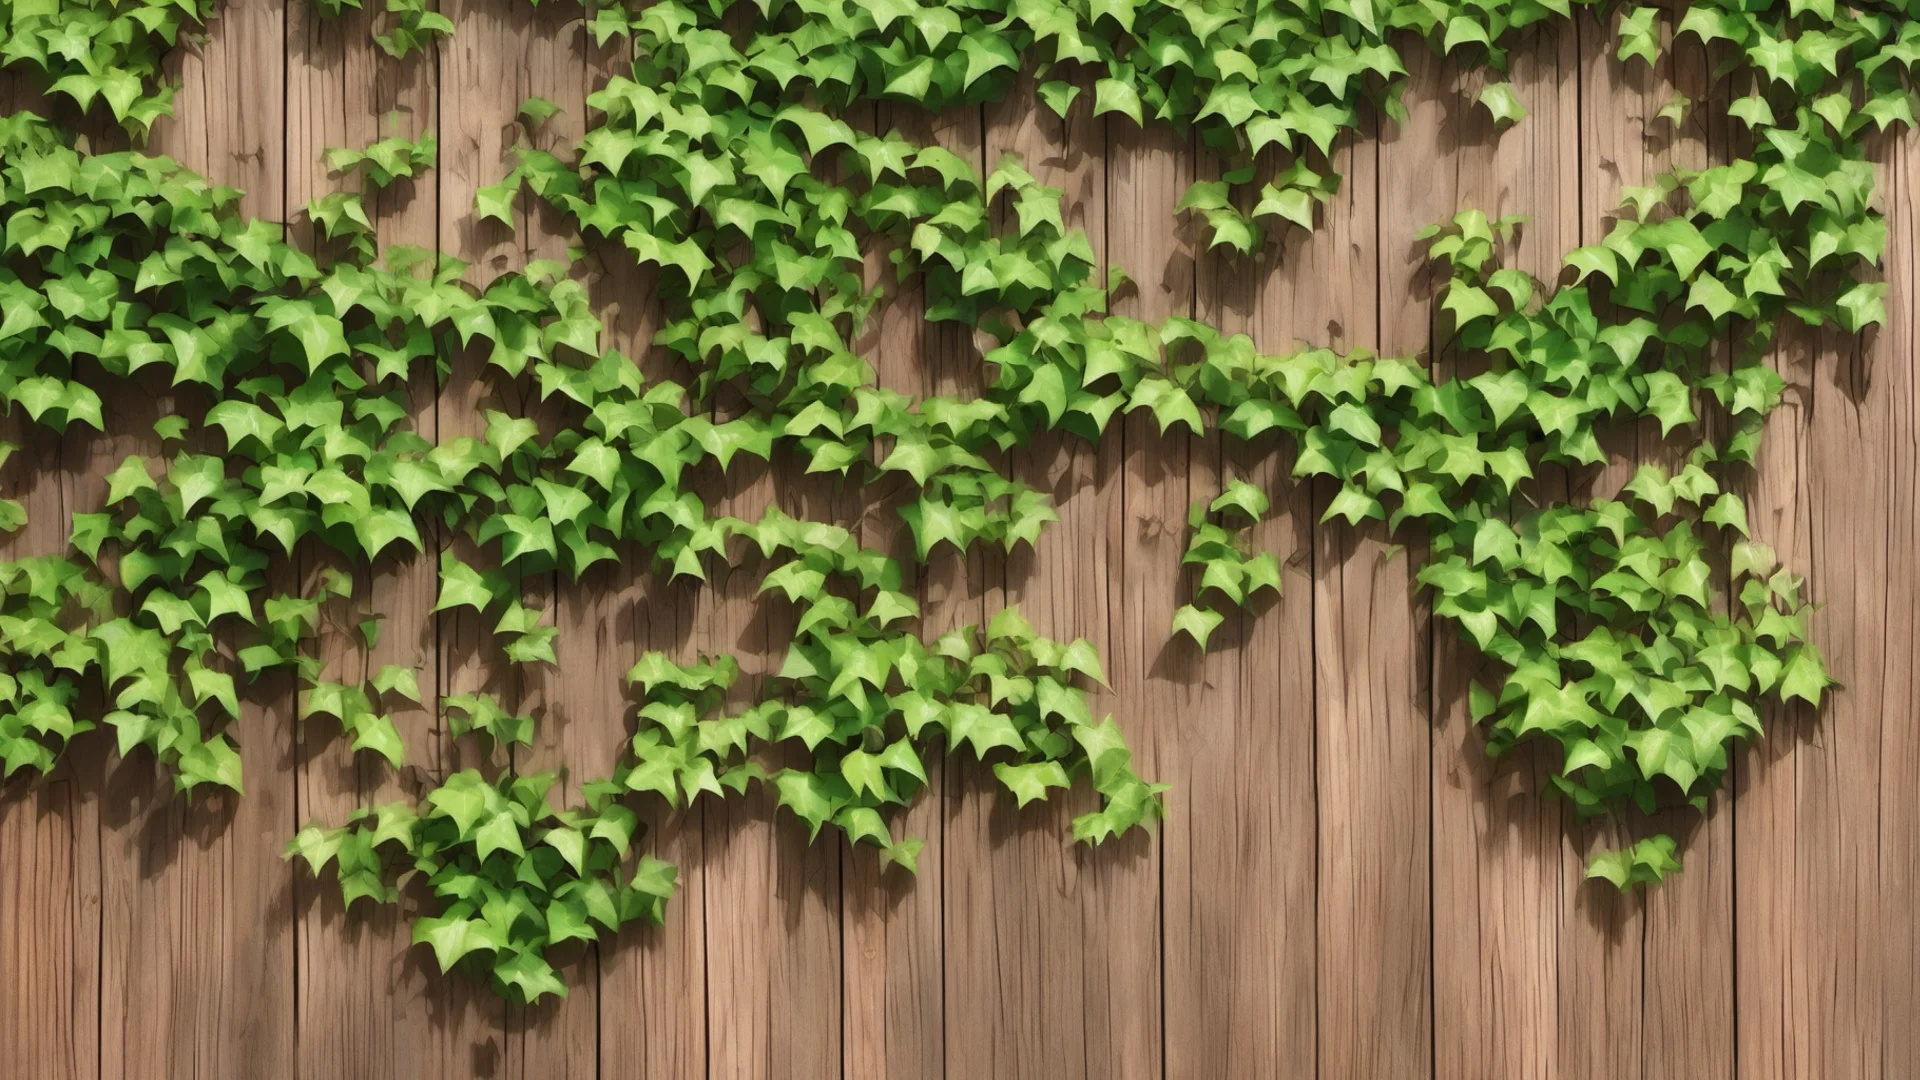 anime style ivy growing on a wood wall wide